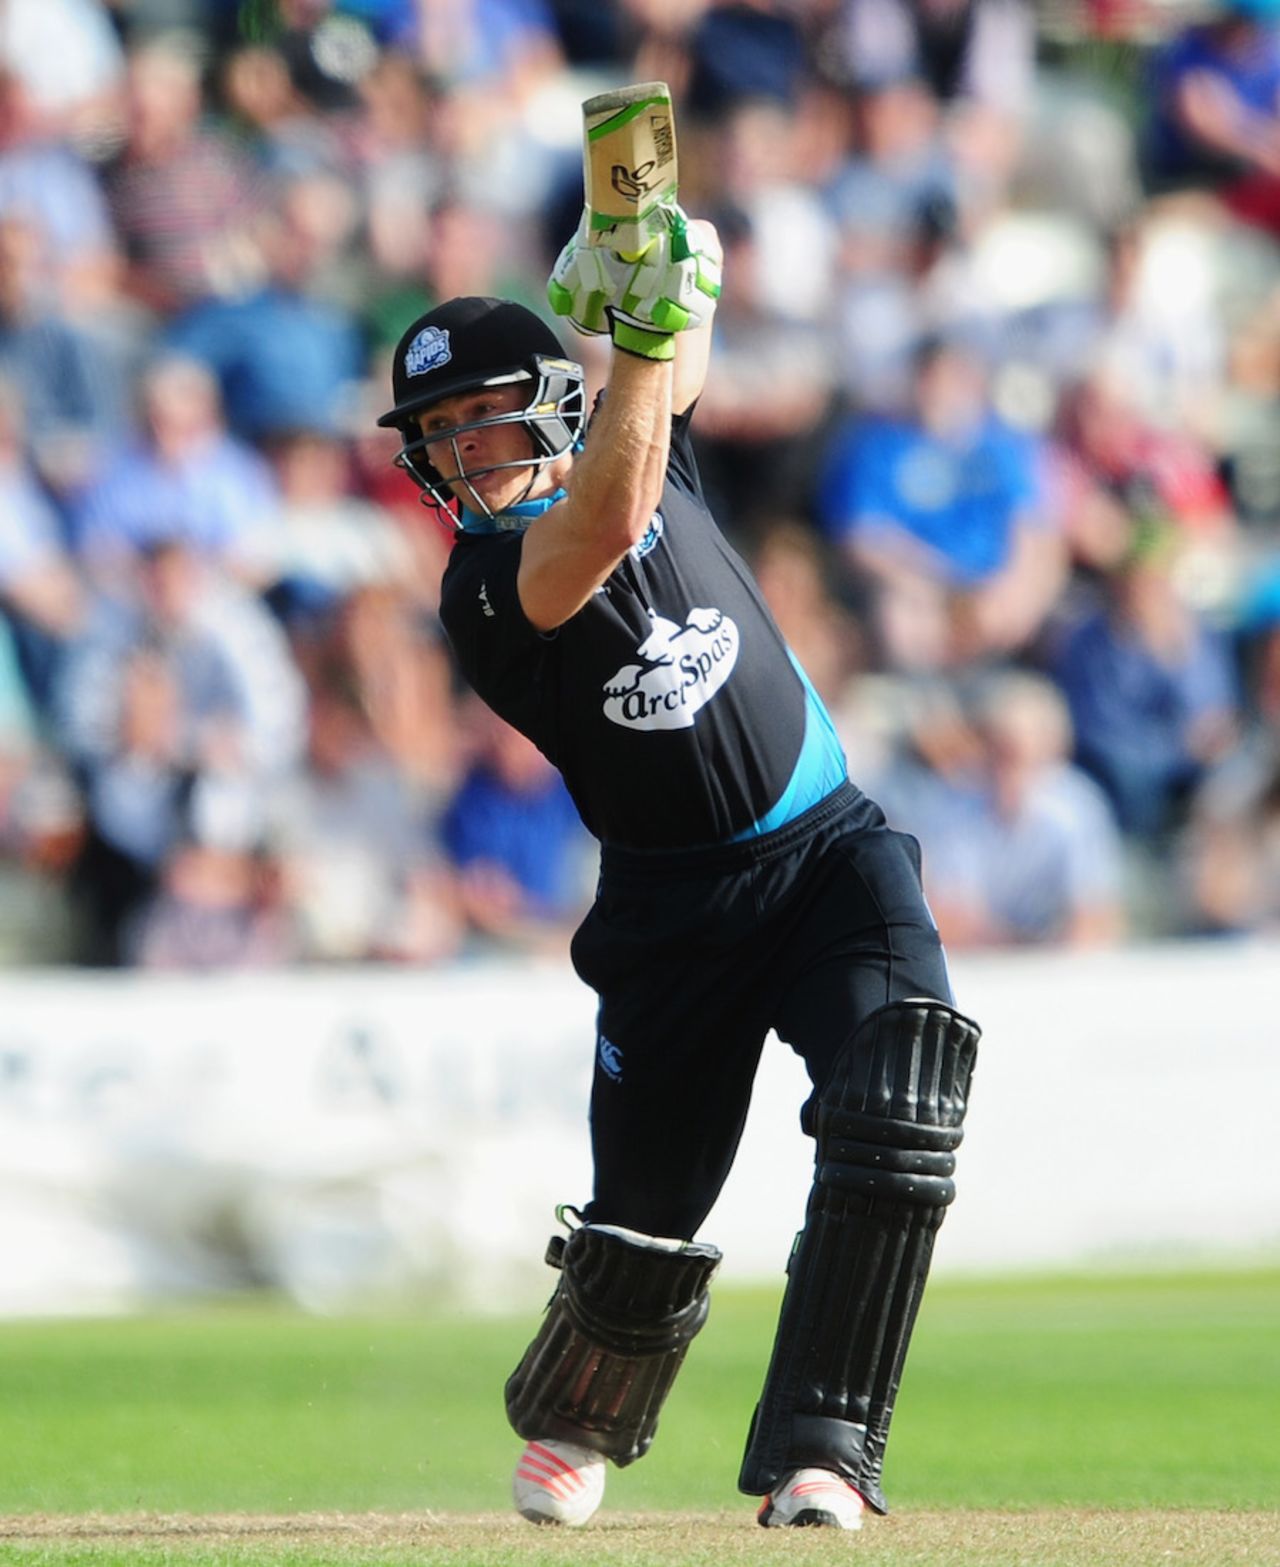 Ben Cox plundered 44 off 21 balls, Worcestershire v Lancashire, NatWest T20 Blast, North Group, New Road, July 8, 2016